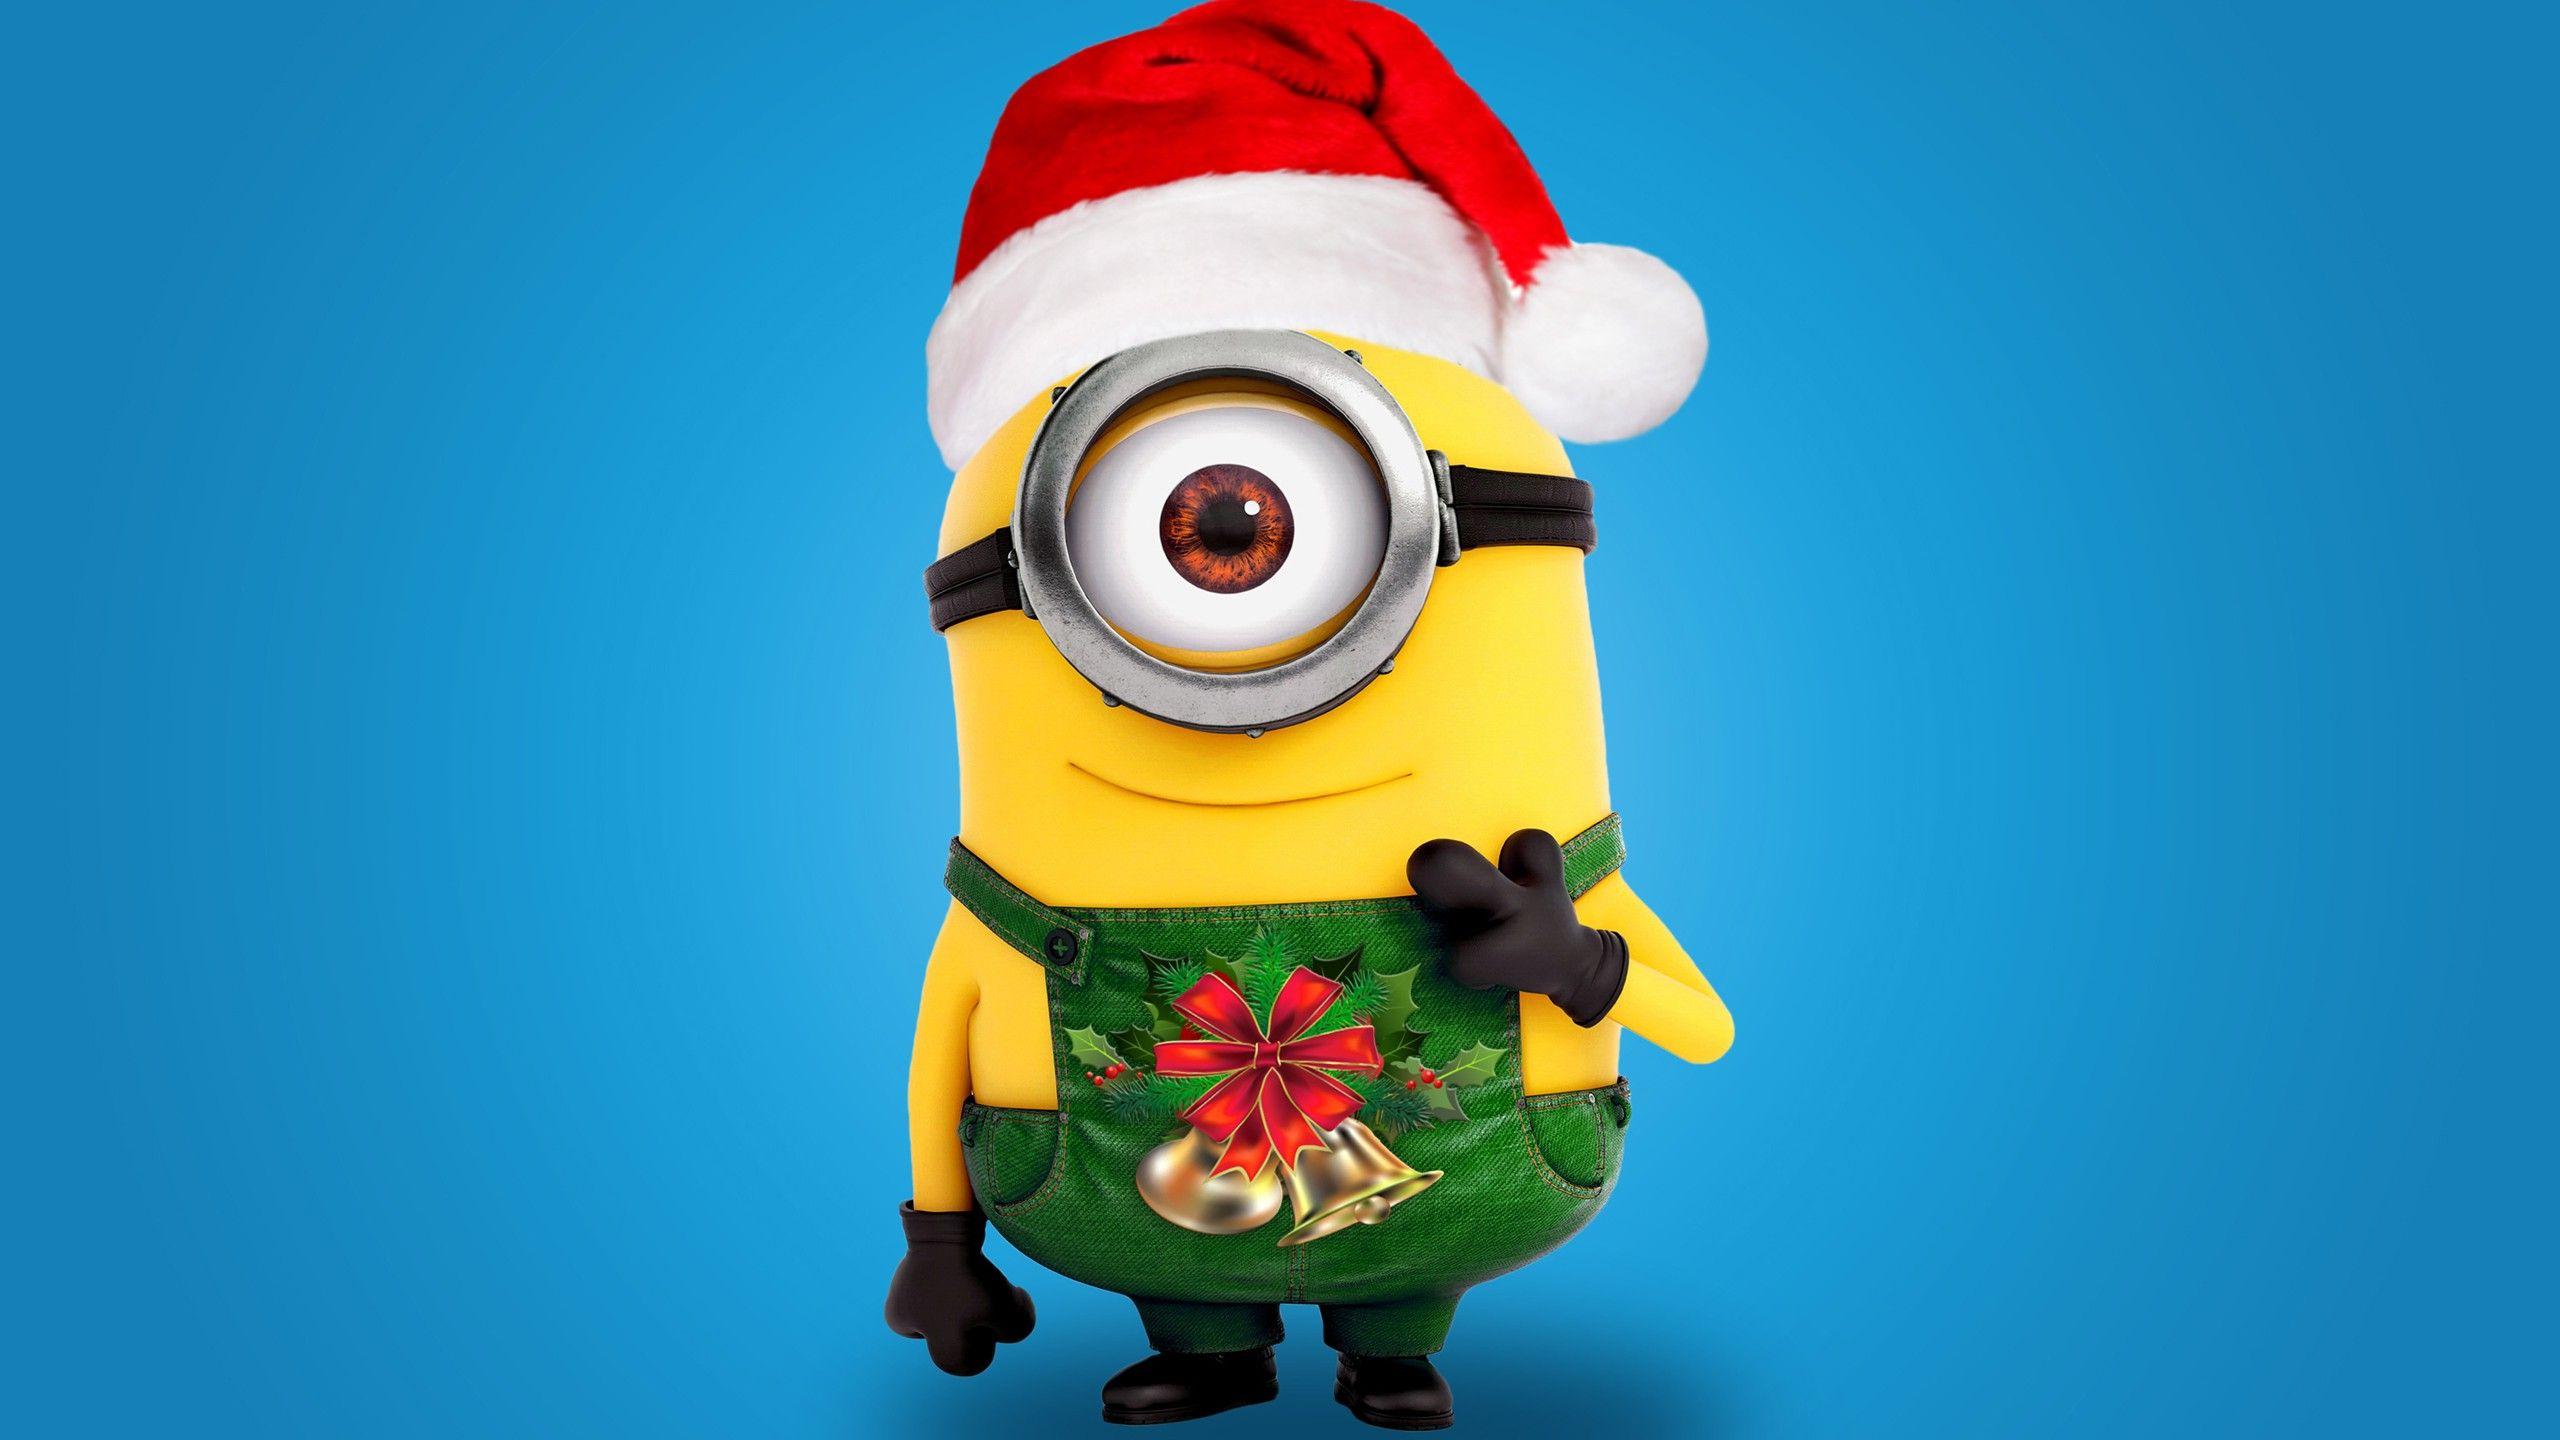 Download minion christmas Wallpaper by SlLVER  a2  Free on ZEDGE now  Browse millions of popular christmas Wa  Minion christmas Minion  pictures Minions funny